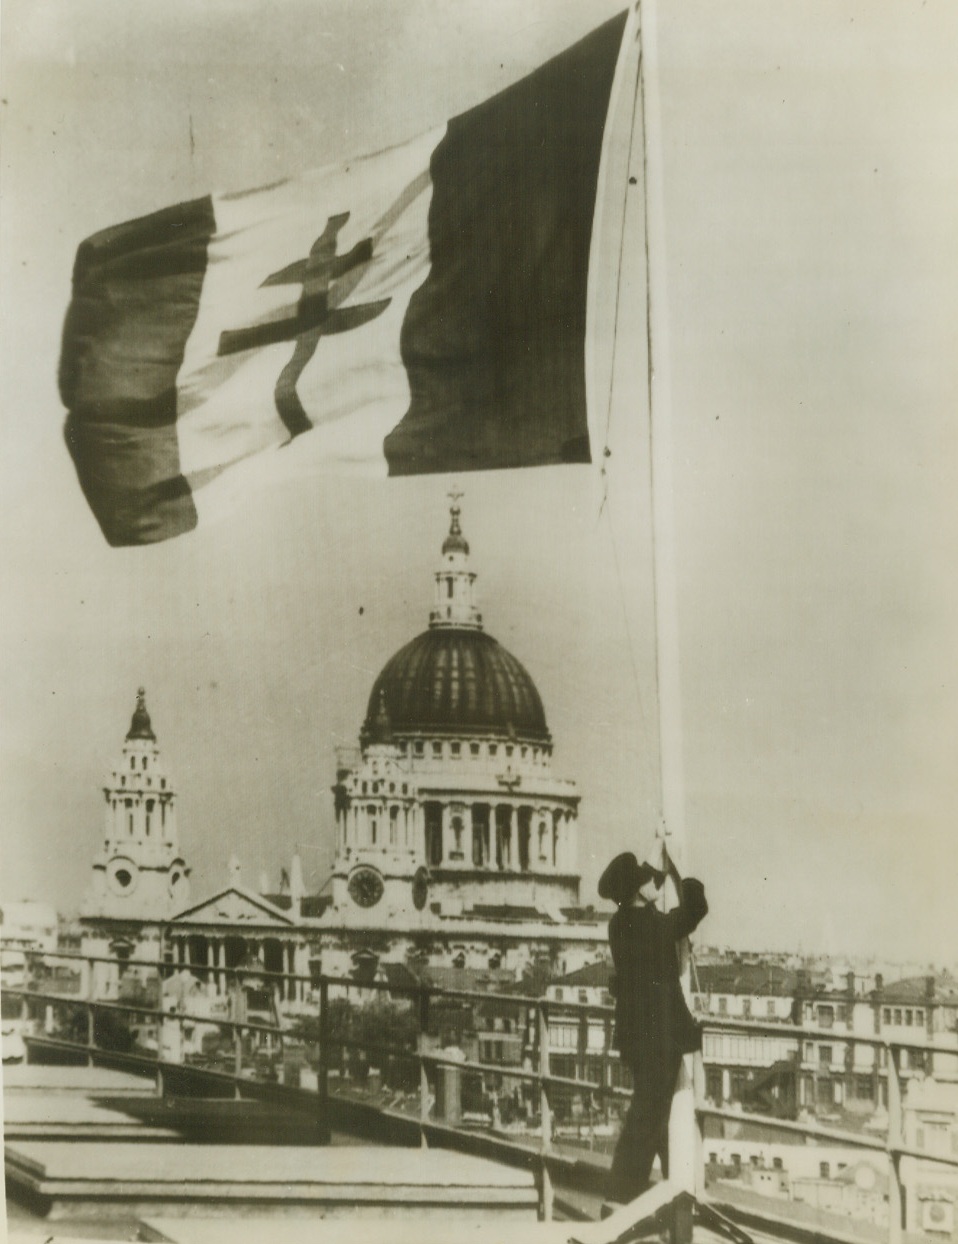 Marking Liberation of Paris, 8/23/1944. London – By way of celebration of the Liberation of Paris, Londoners hoisted a flag bearing the Cross of Lorraine to wave over the British capital. In the background is St. Paul’s Cathedral. Credit: ACME Radiophoto;